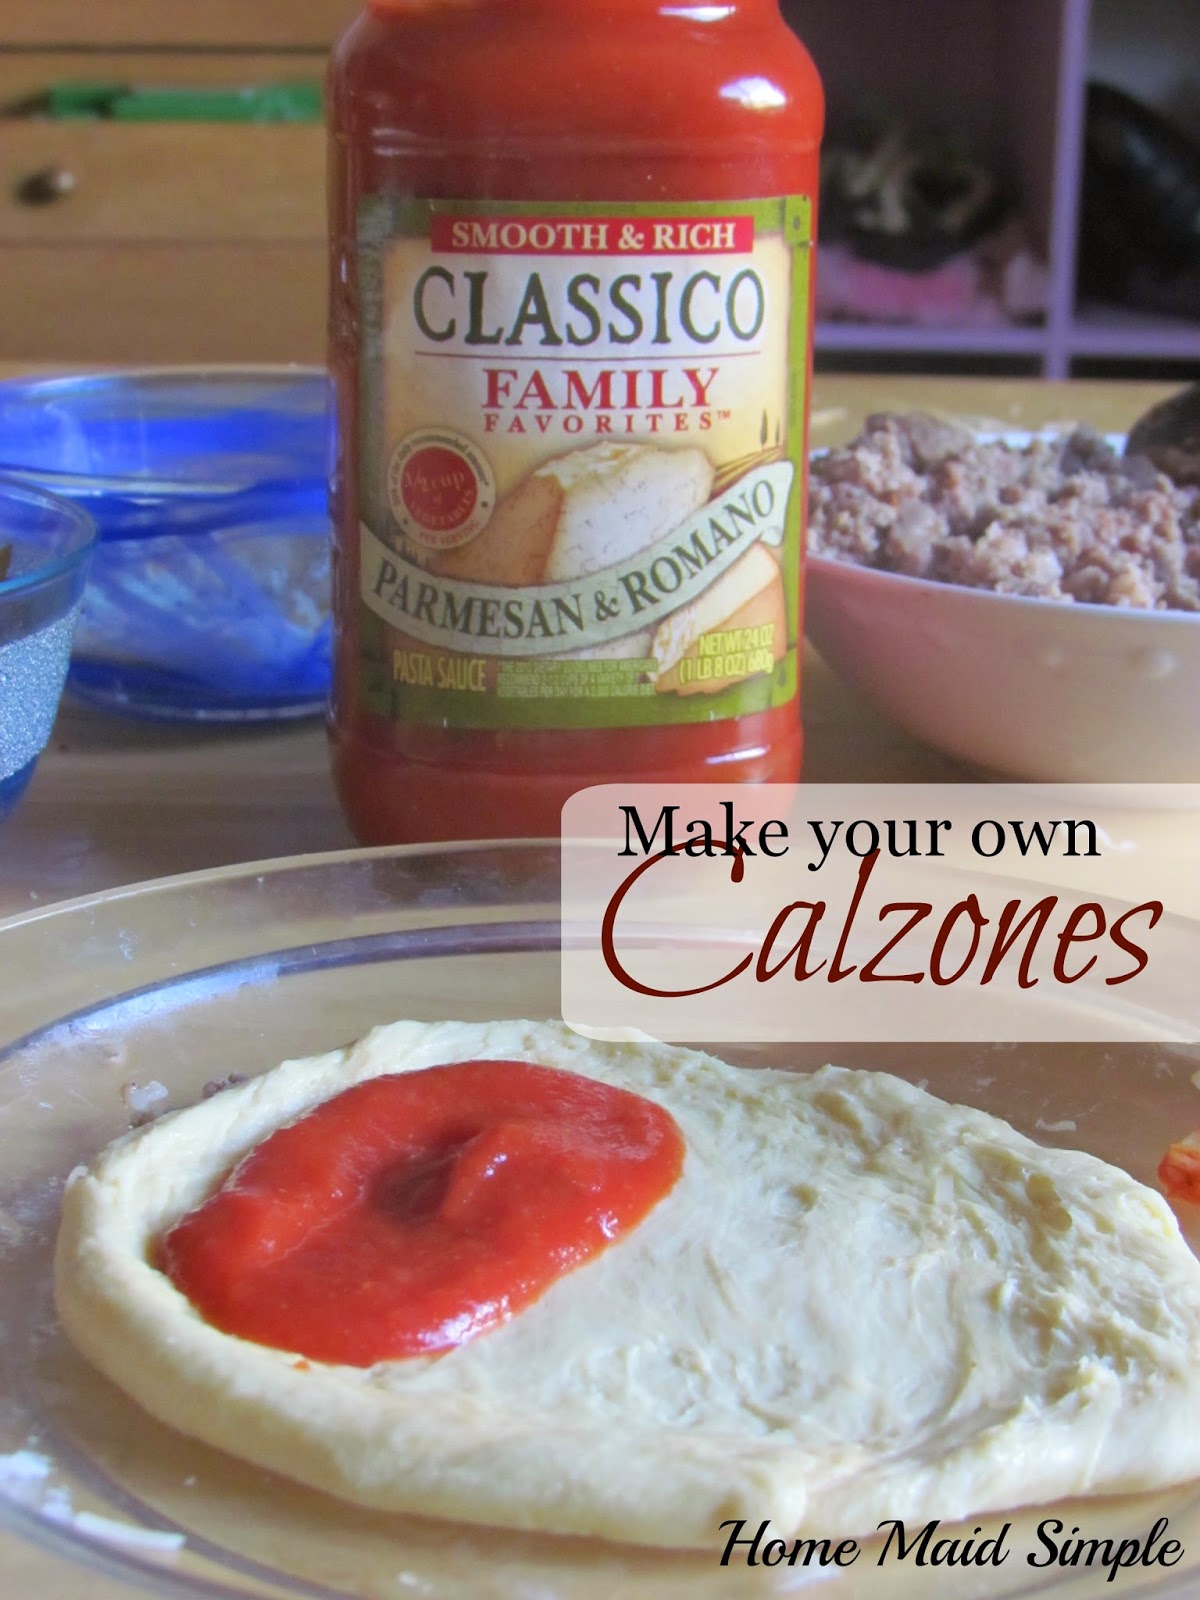 Make your own Calzones with the family